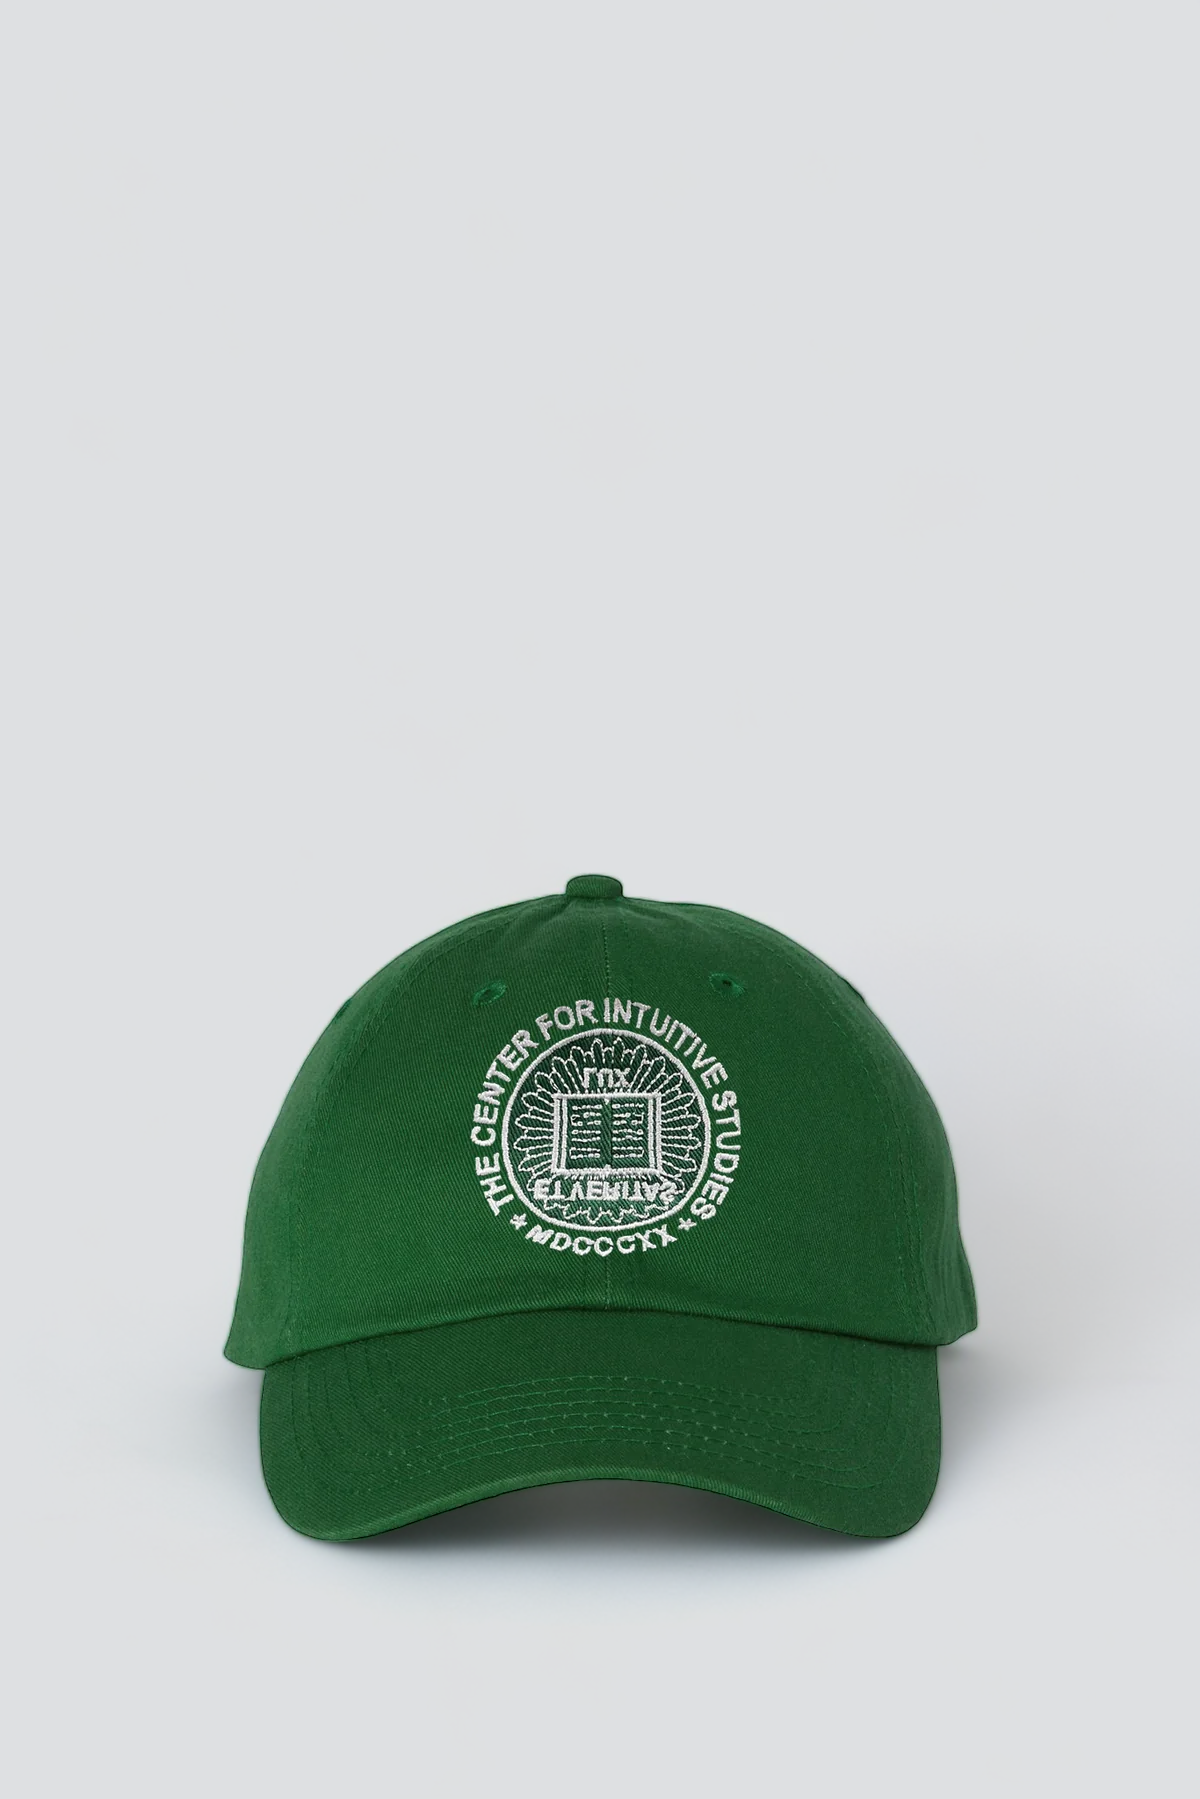 The Center for Intuitive Studies Circle Logo Hat - Forest Green/White